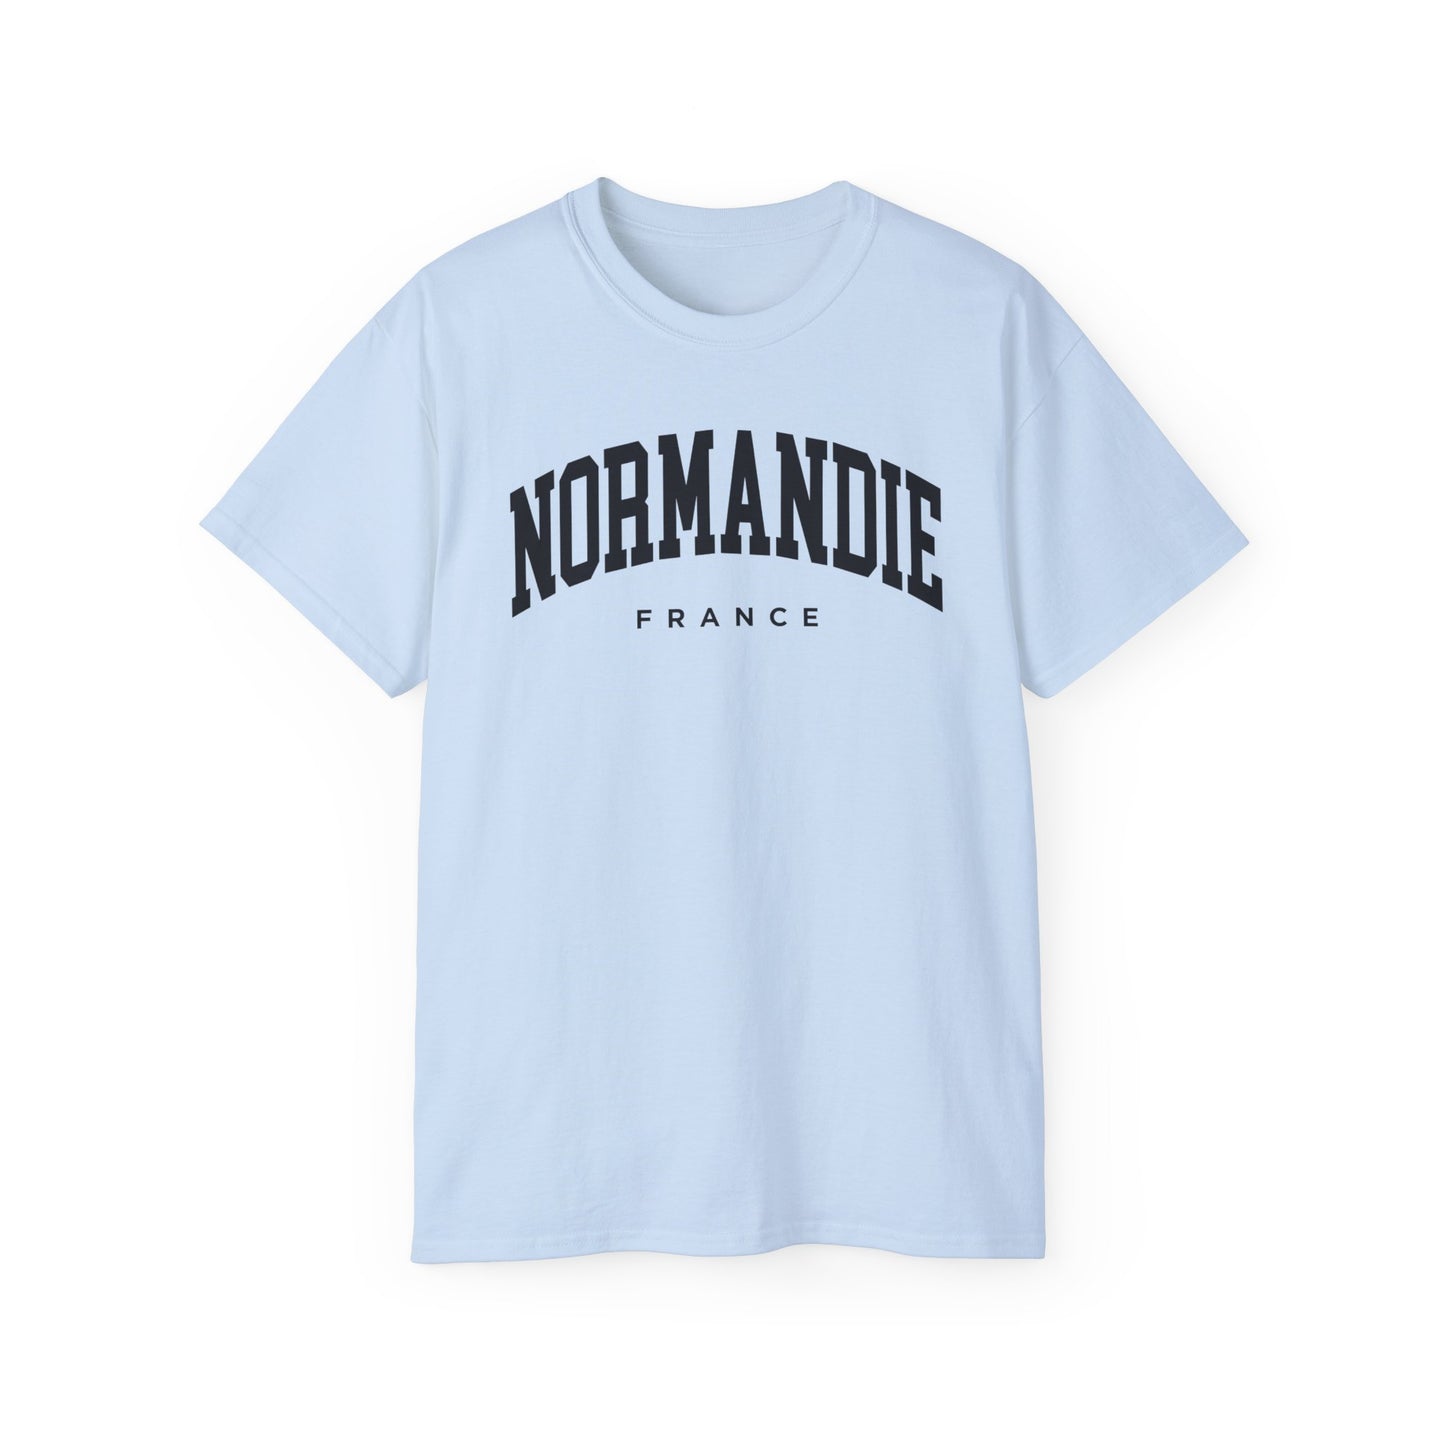 Normandy France Tee